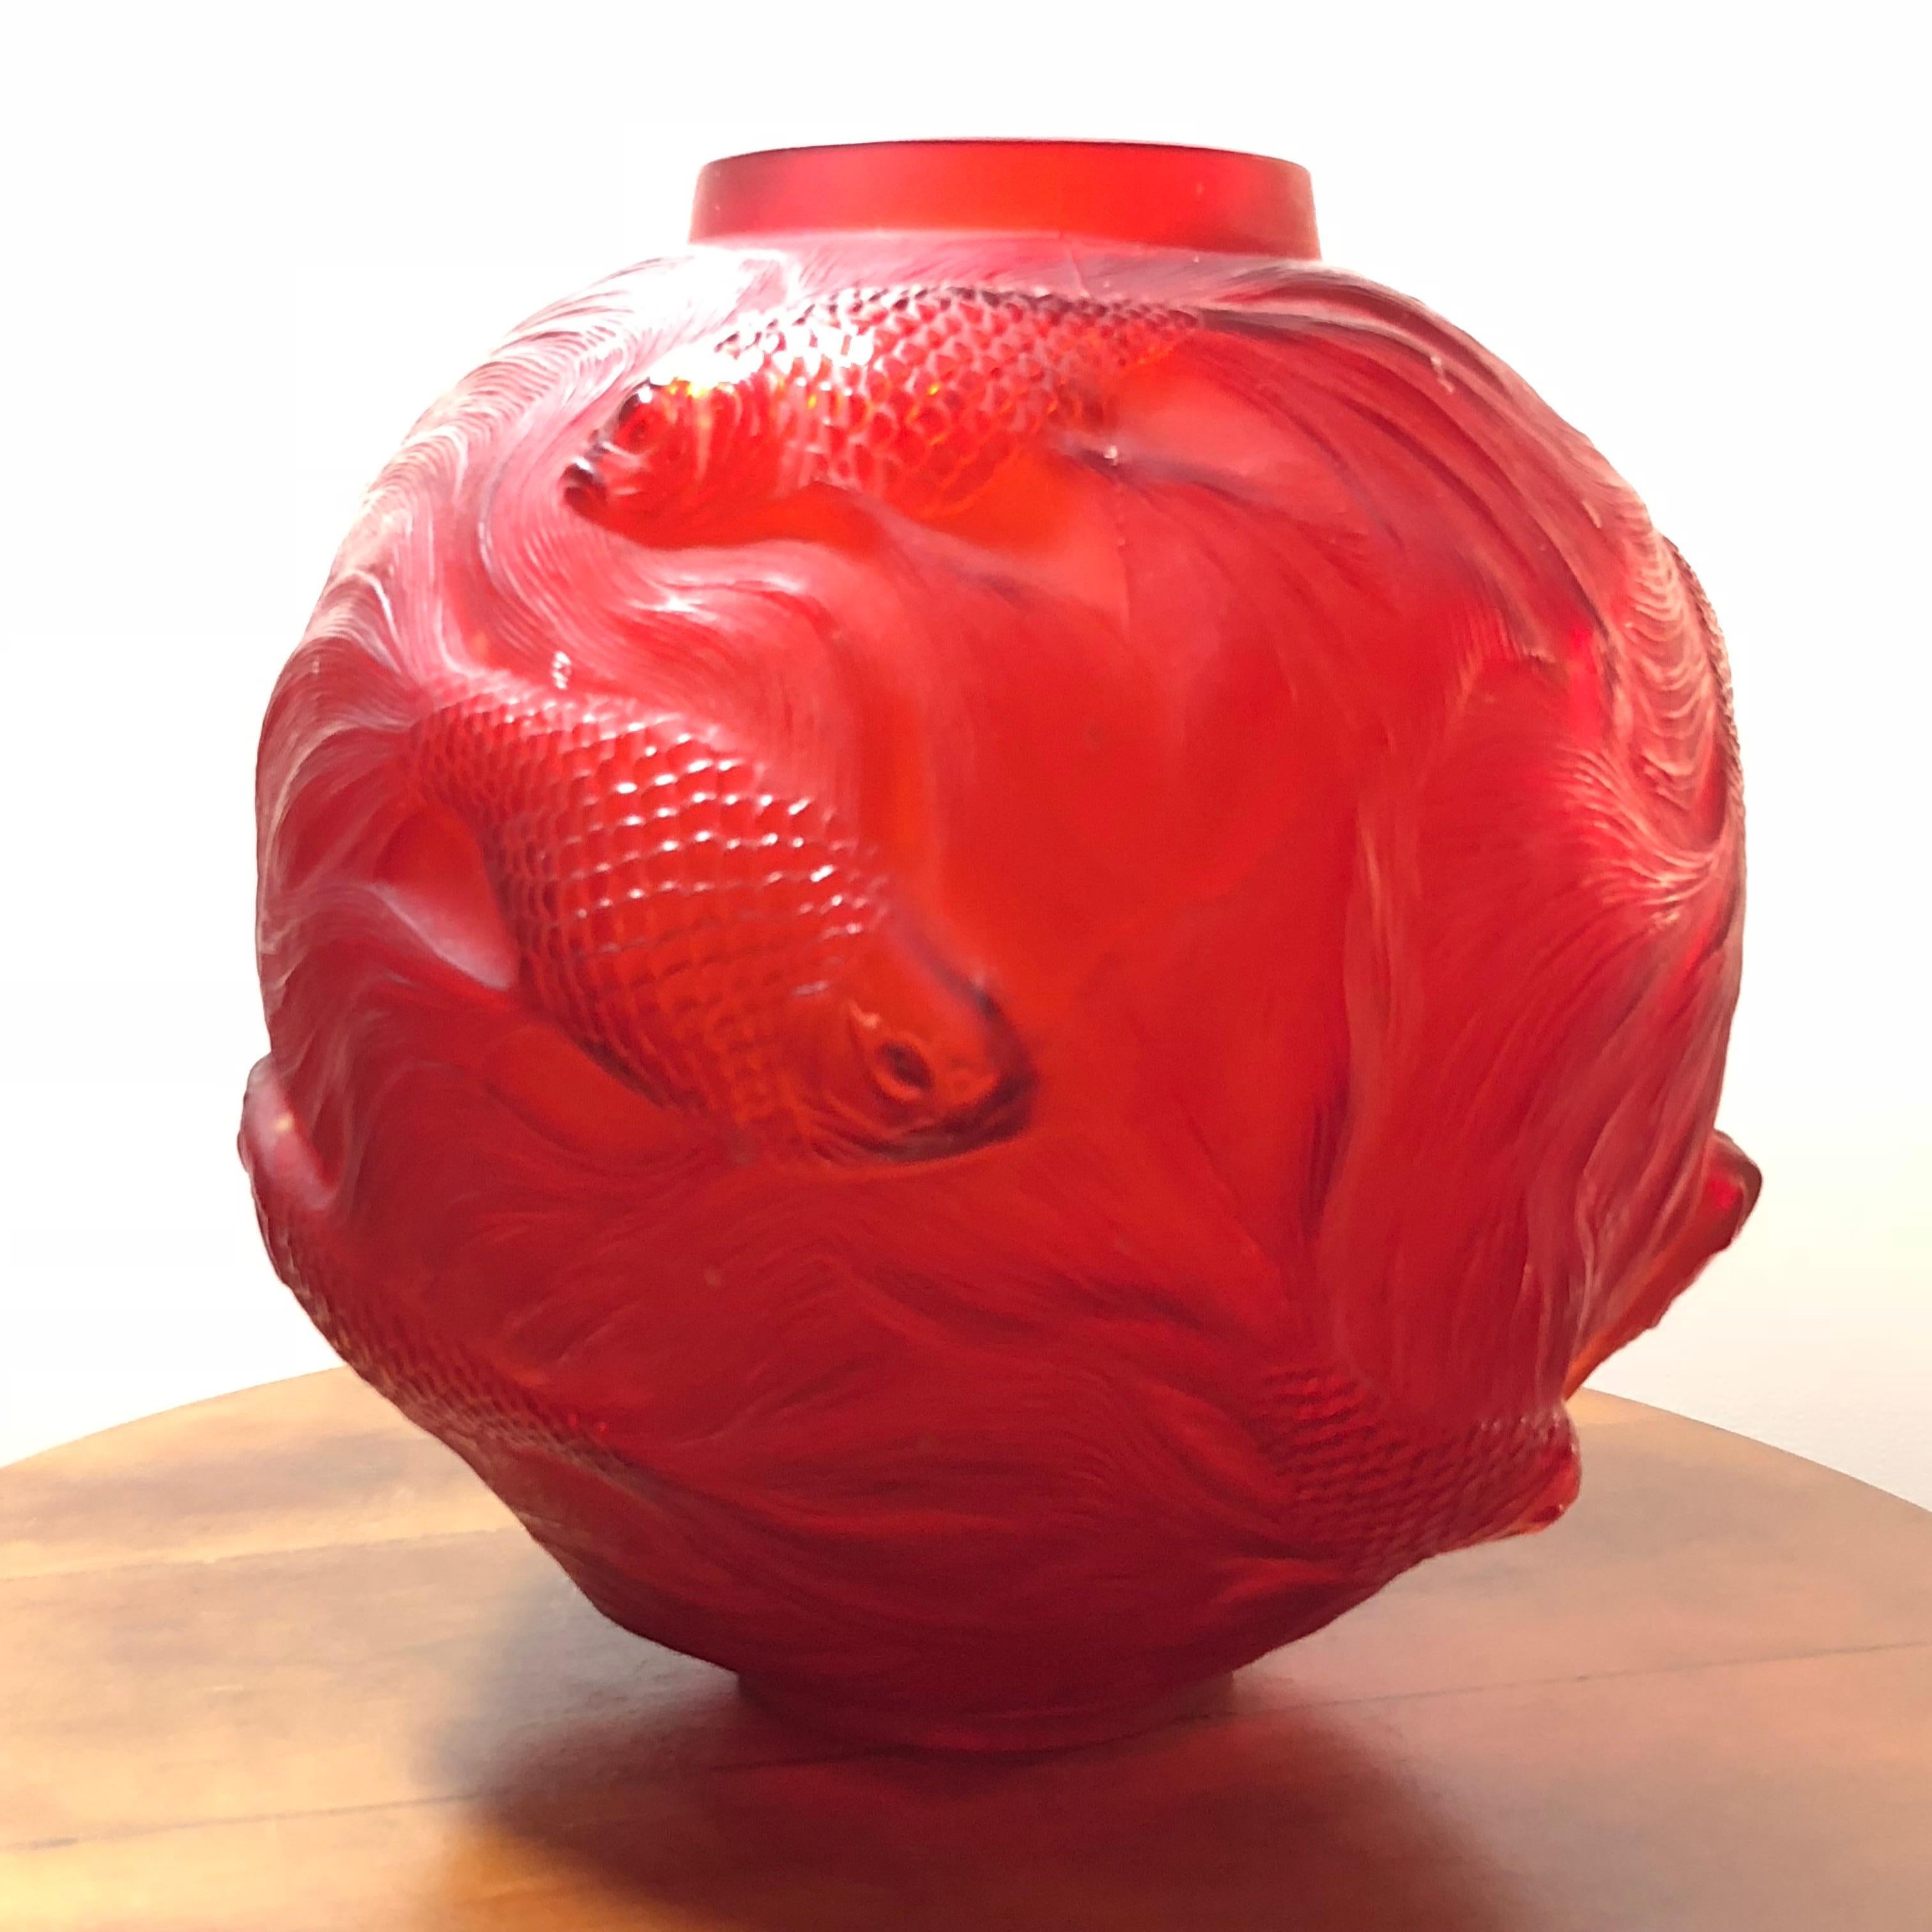 Art Deco 1924 Rene Lalique Formose Vase in Double Cased Red Tomato Glass, Fishes Design